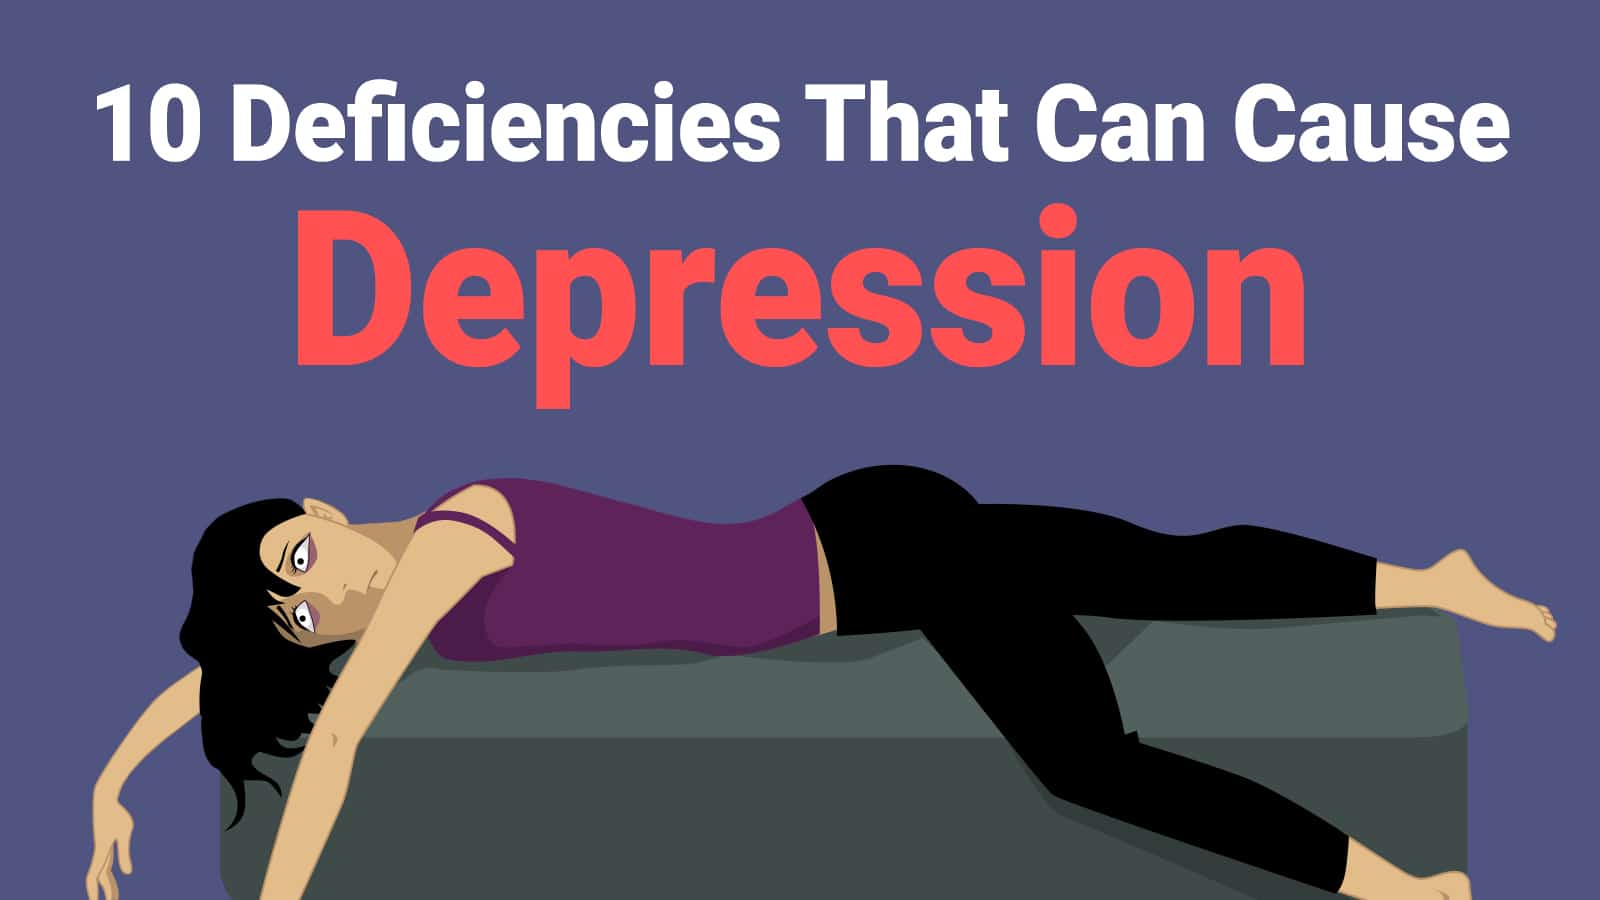 10 Deficiencies That Can Cause Depression